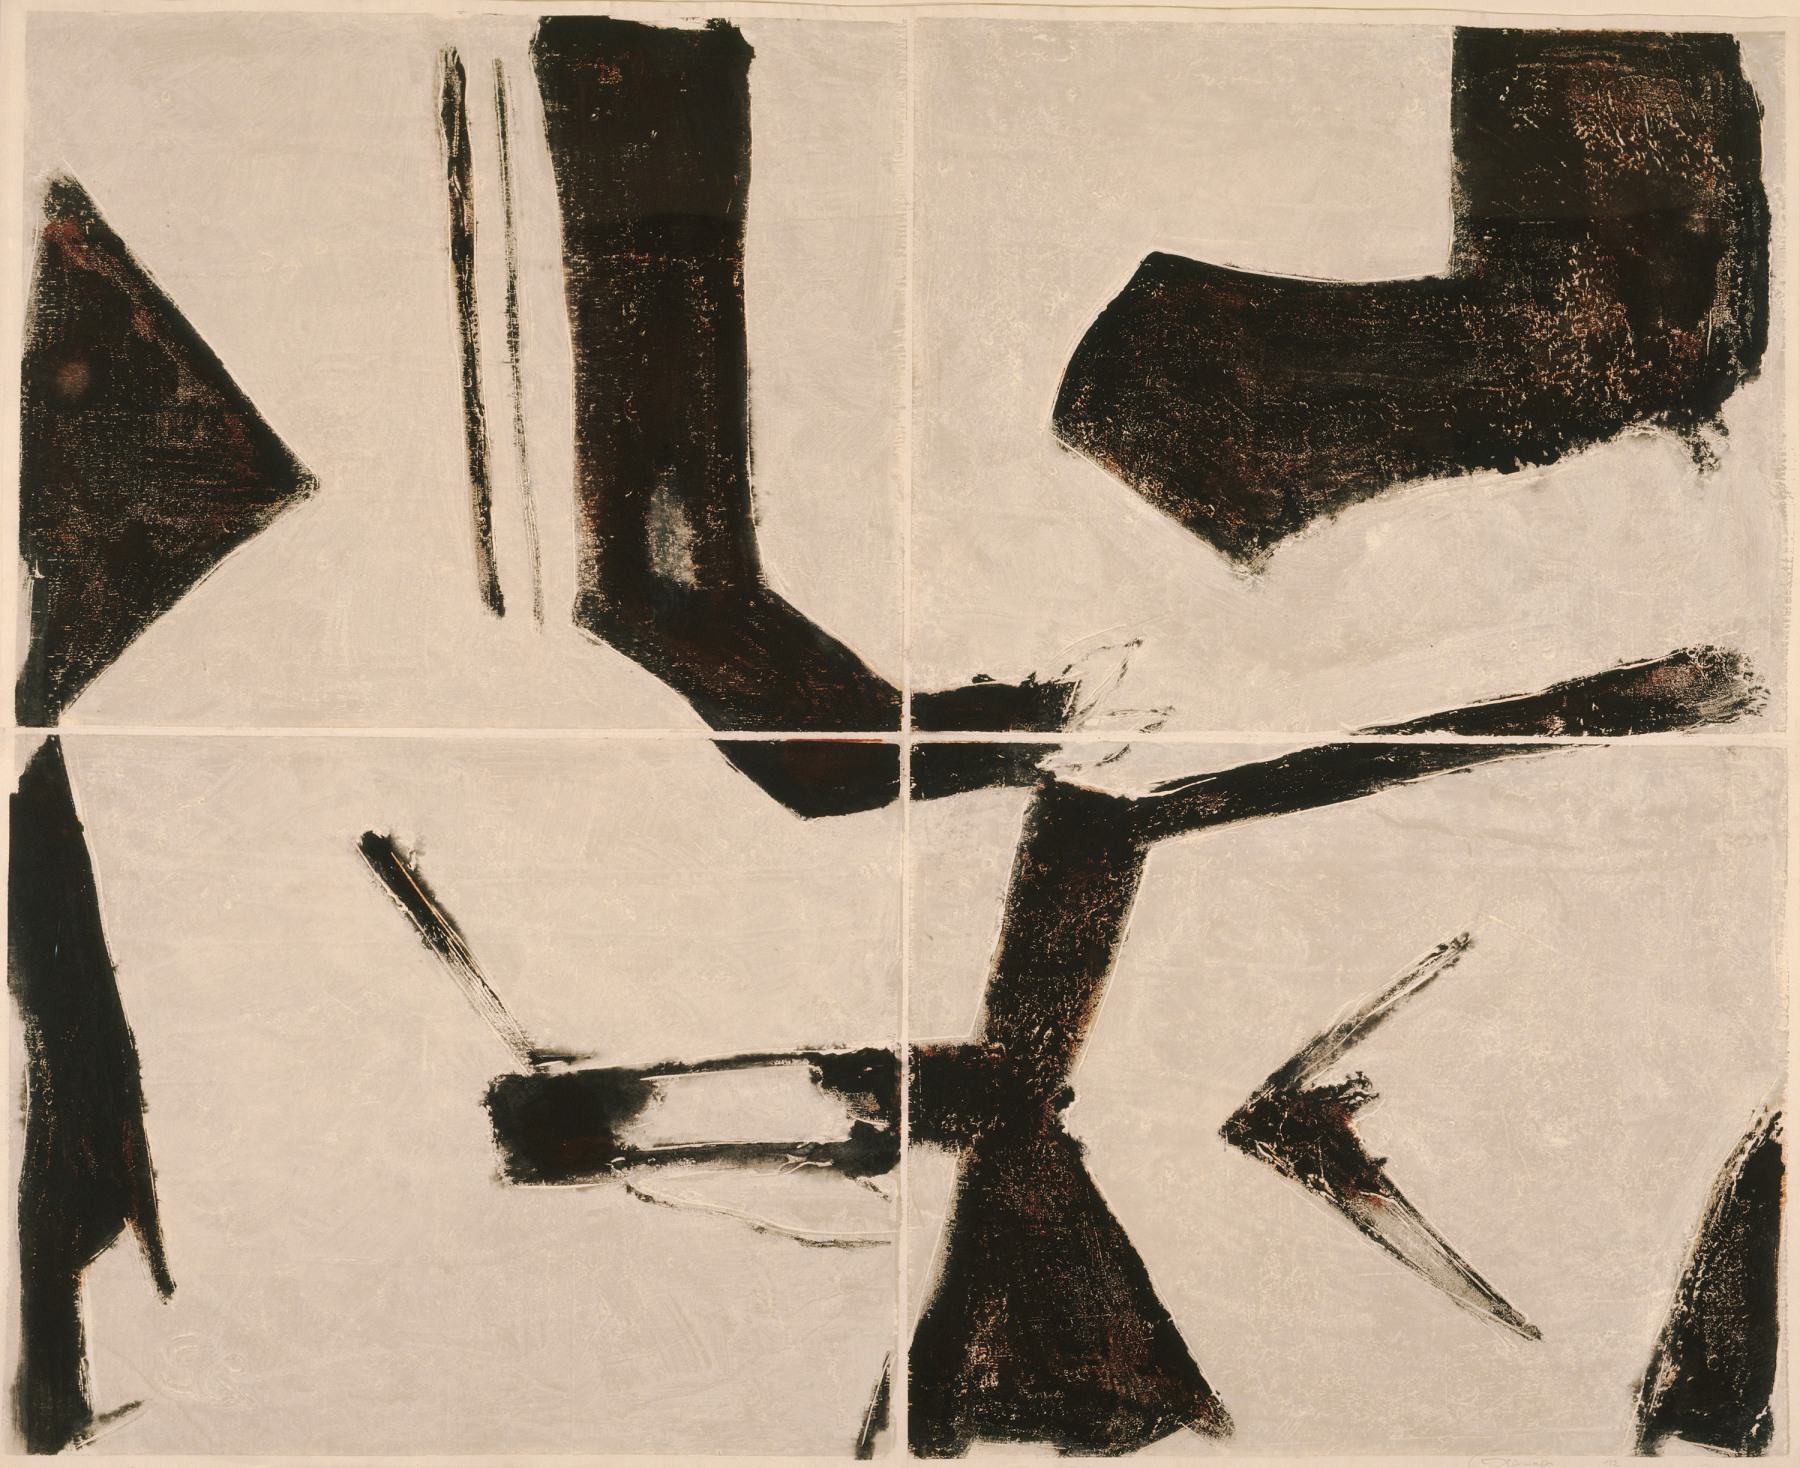 Untitled, PP 4002, 1972
Water Soluble Printer&amp;rsquo;s Ink and Casein
​​​​​​​on Handmade Japanese Paper
H: 38 3/4 x W: 48 1/4 inches

&amp;nbsp;